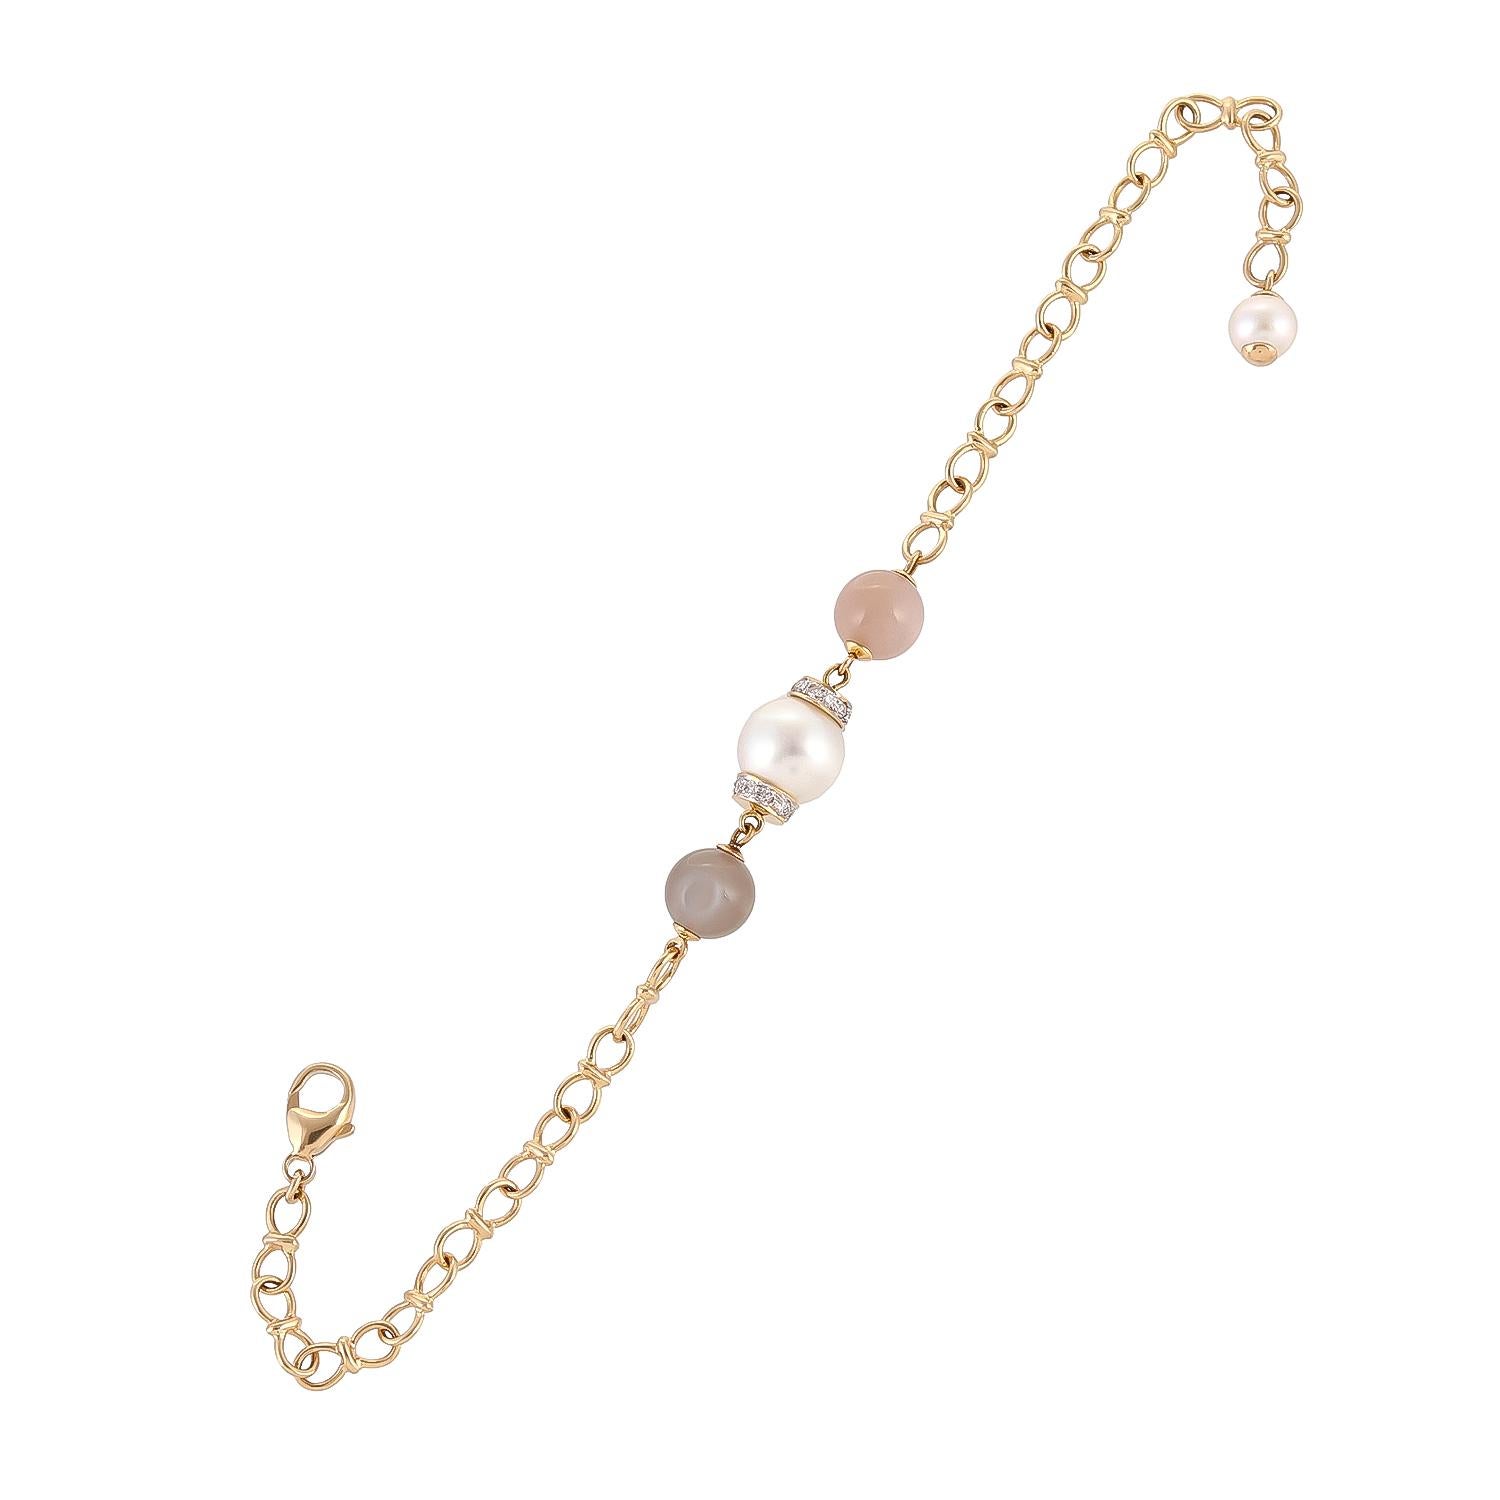 Design to encourage love, this simple but delicate bracelet is handcrafted in 18 karats yellow gold, it is a perfect combination of multi-coloured moonstone weighing approximately 7.81 carats and 4.04 carats freshwater pearl for your everyday